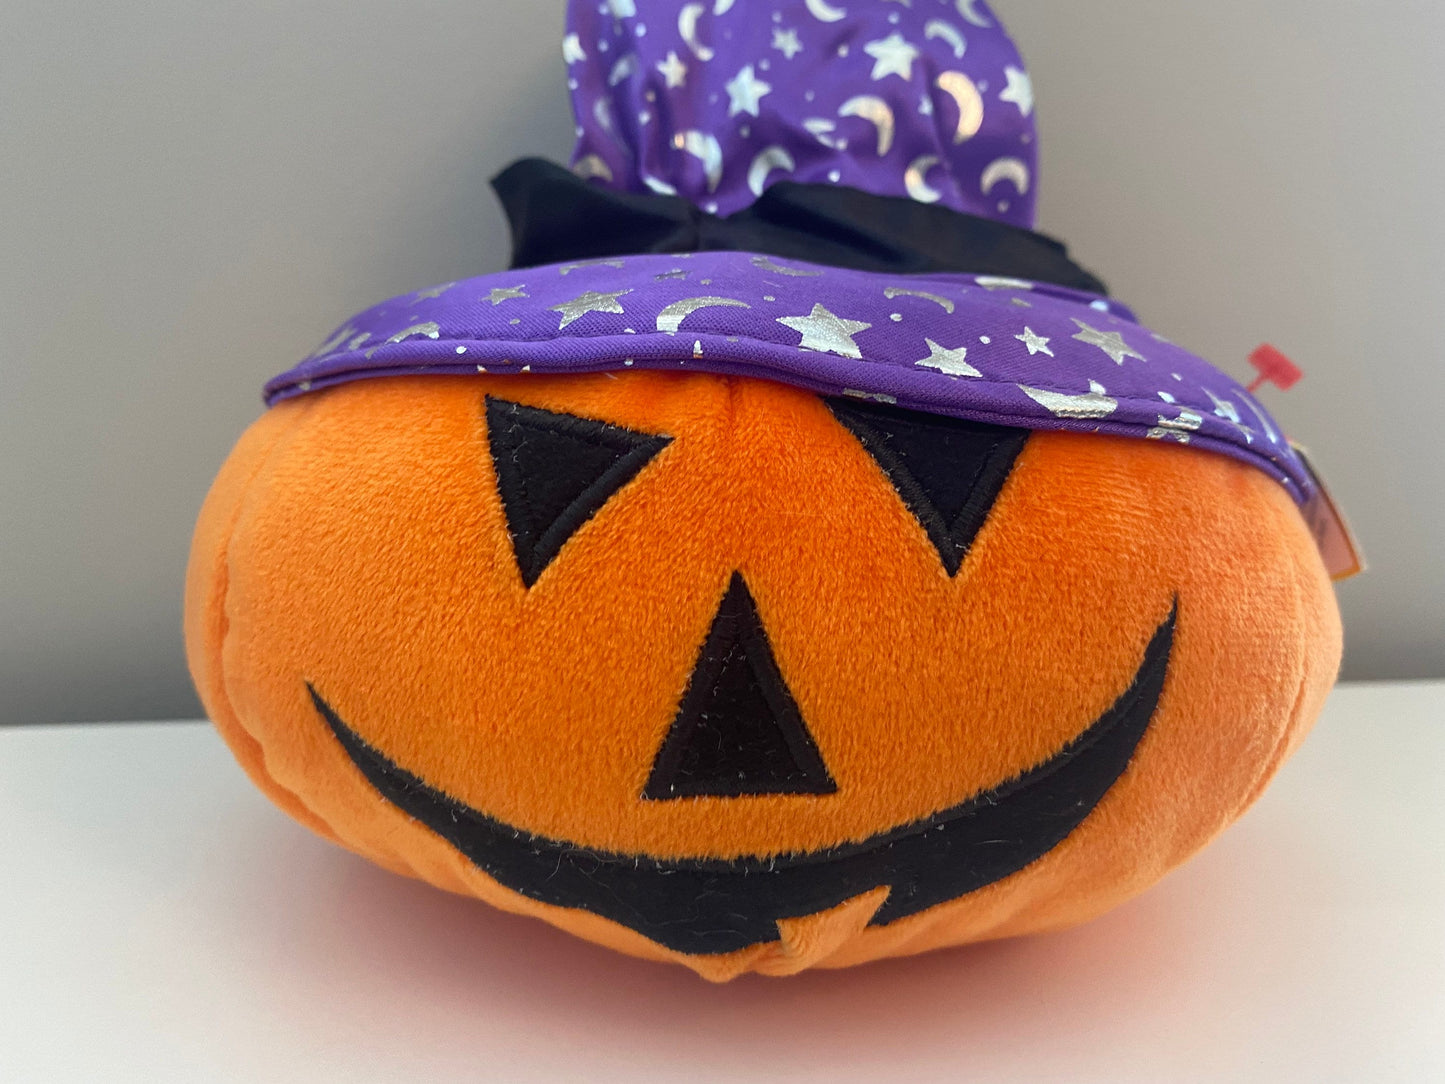 Ty Pluffies Collection “Gourdy” the Smiling Pumpkin Plush (9 inch)